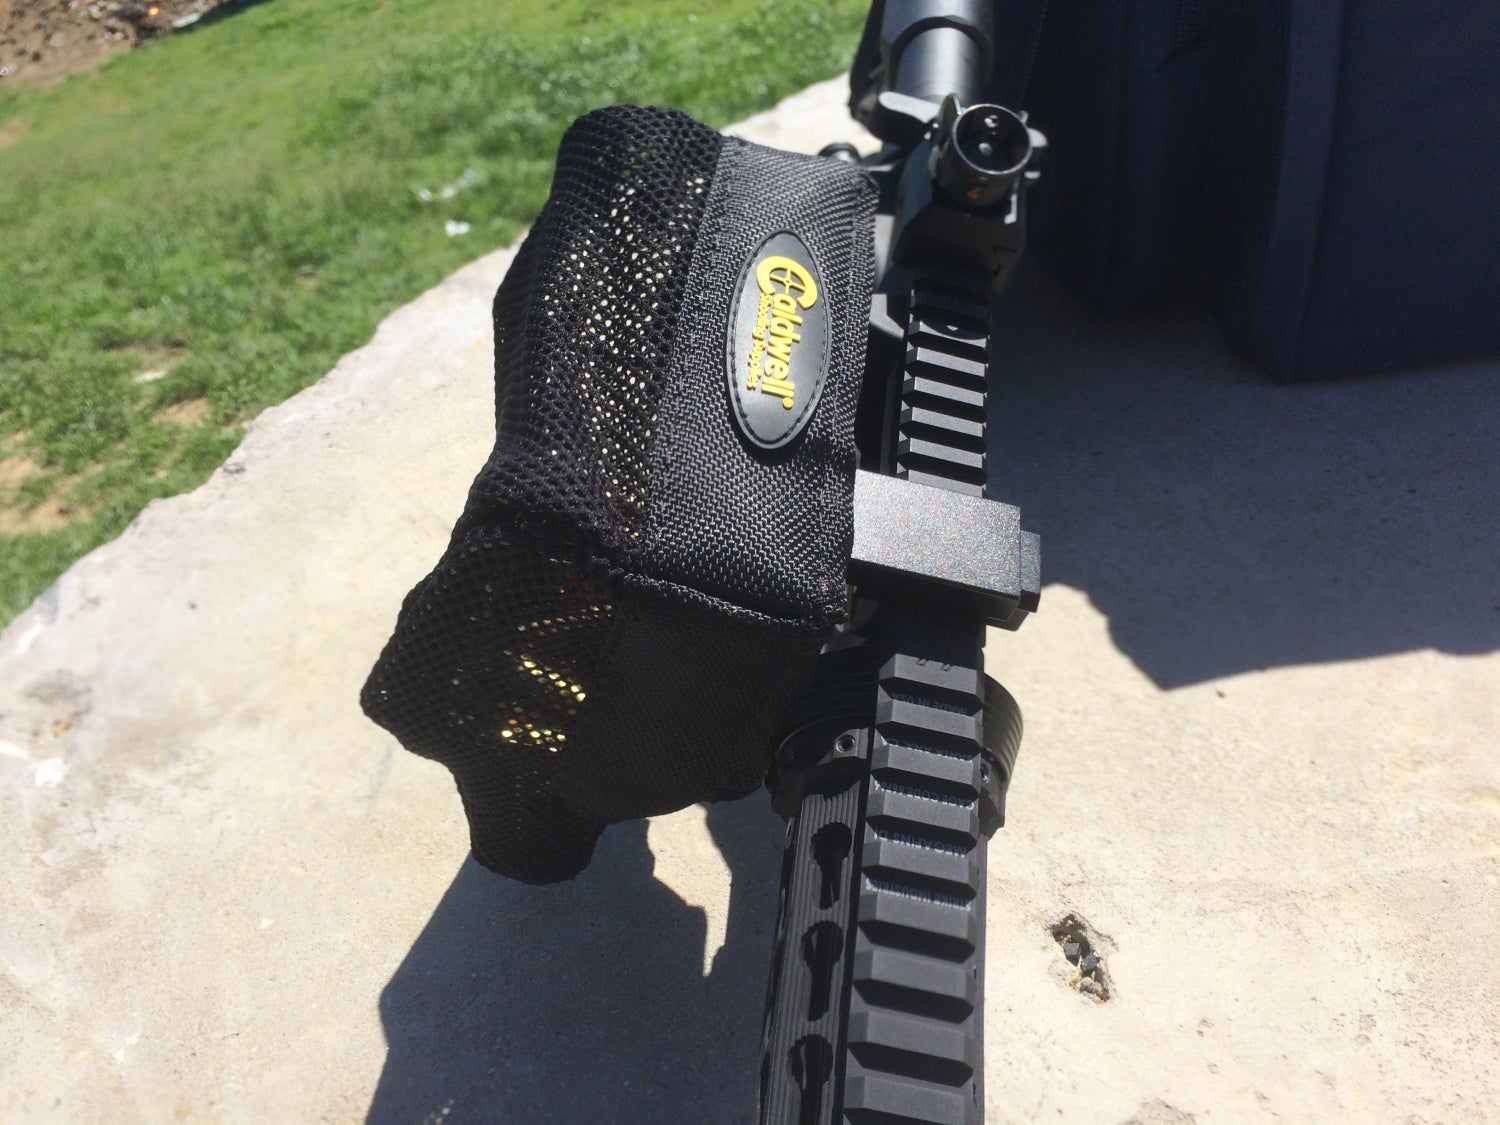 VIDEO: The TacStar Brass Catcher Makes Life Easier for AR Shooters